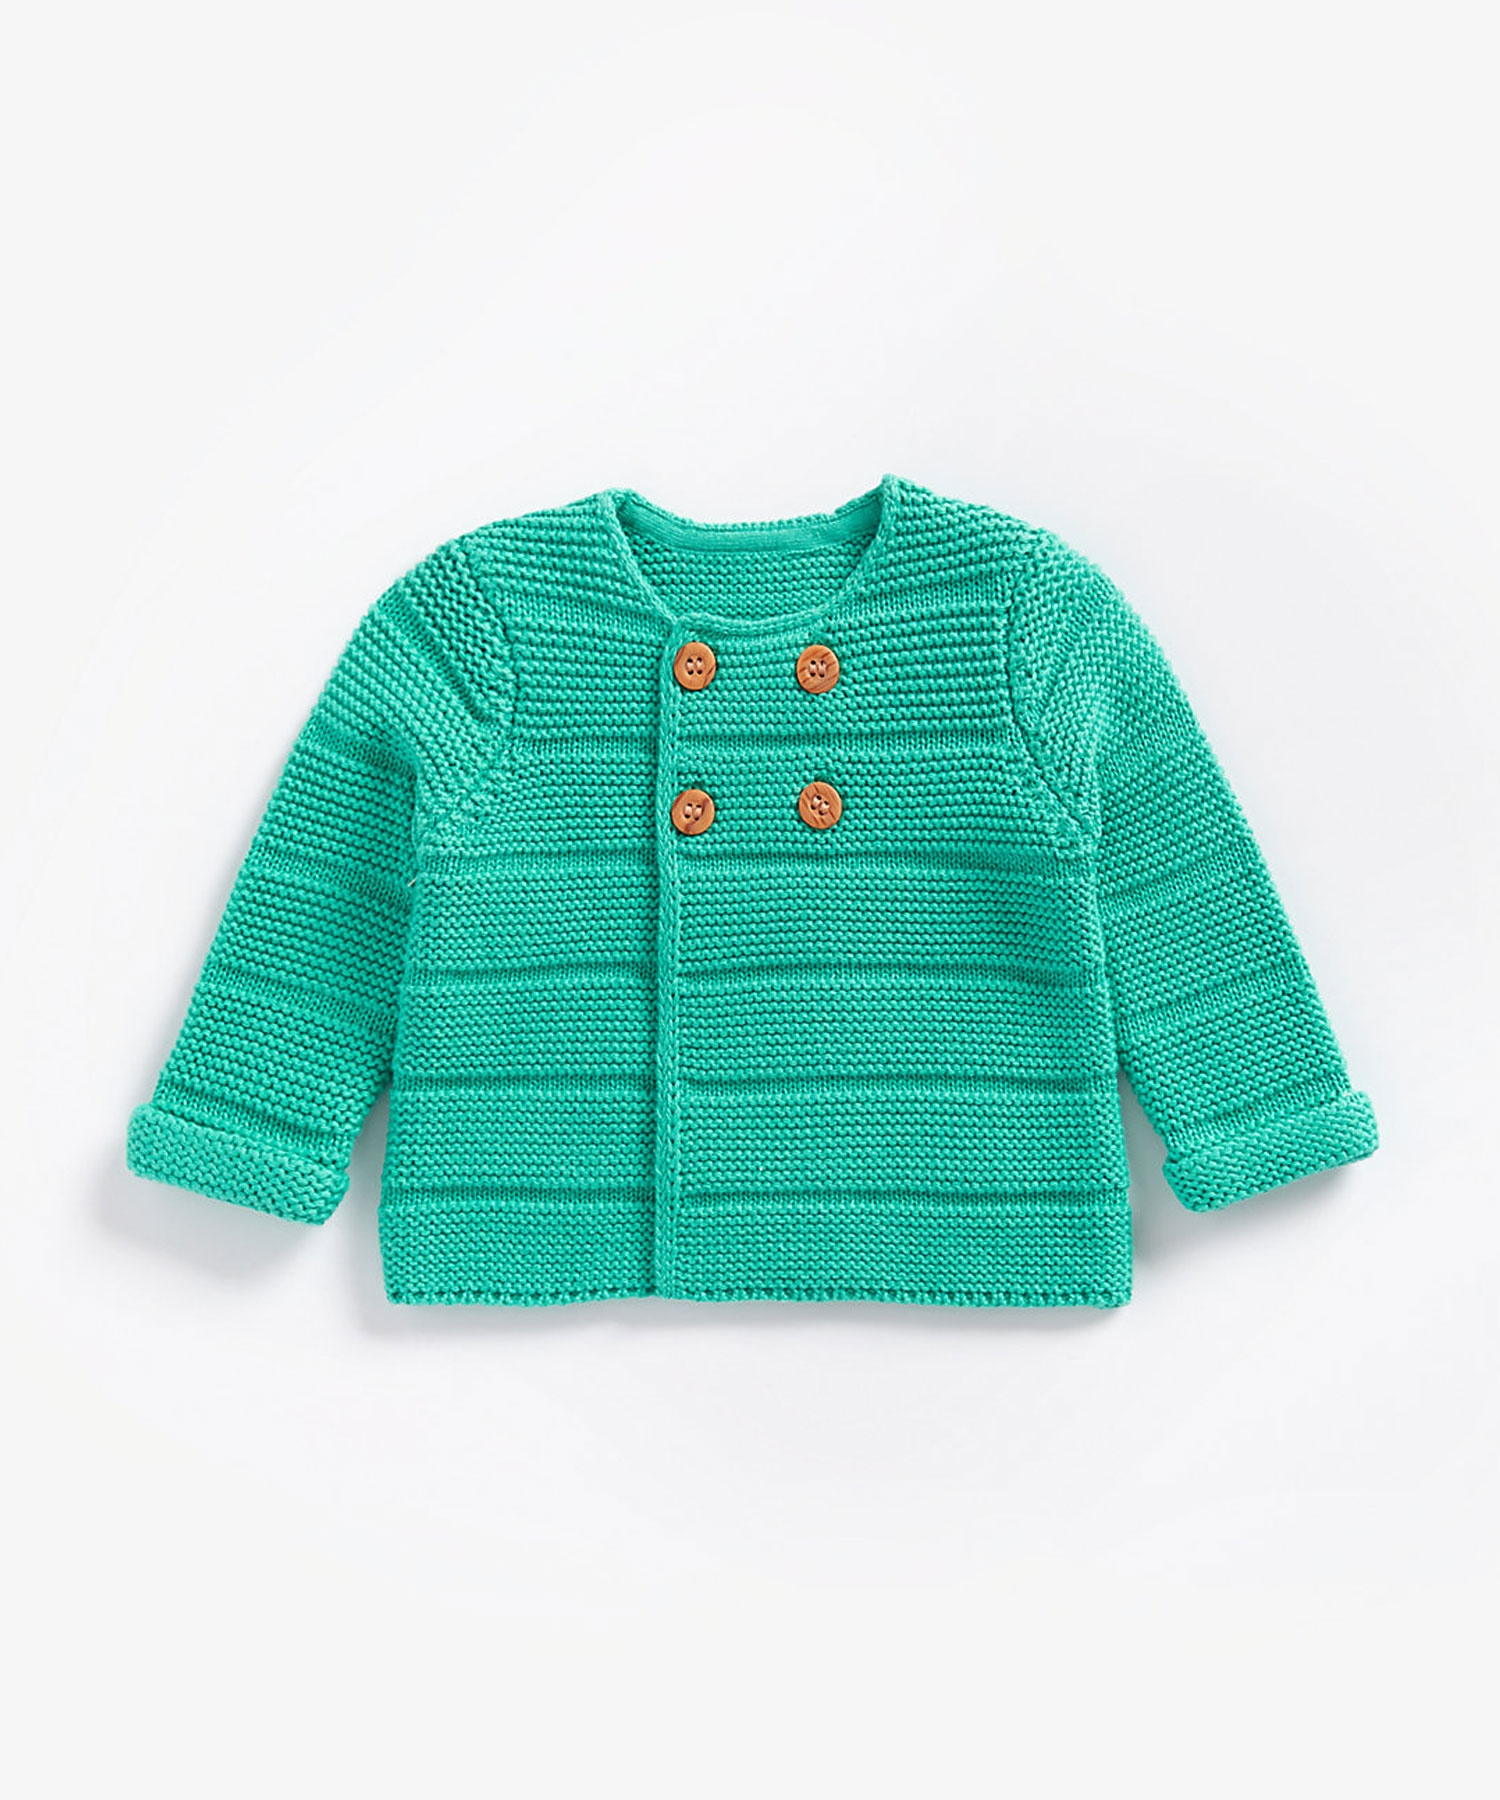 Boys Full Sleeves Cardigan With Button Fastening - Green